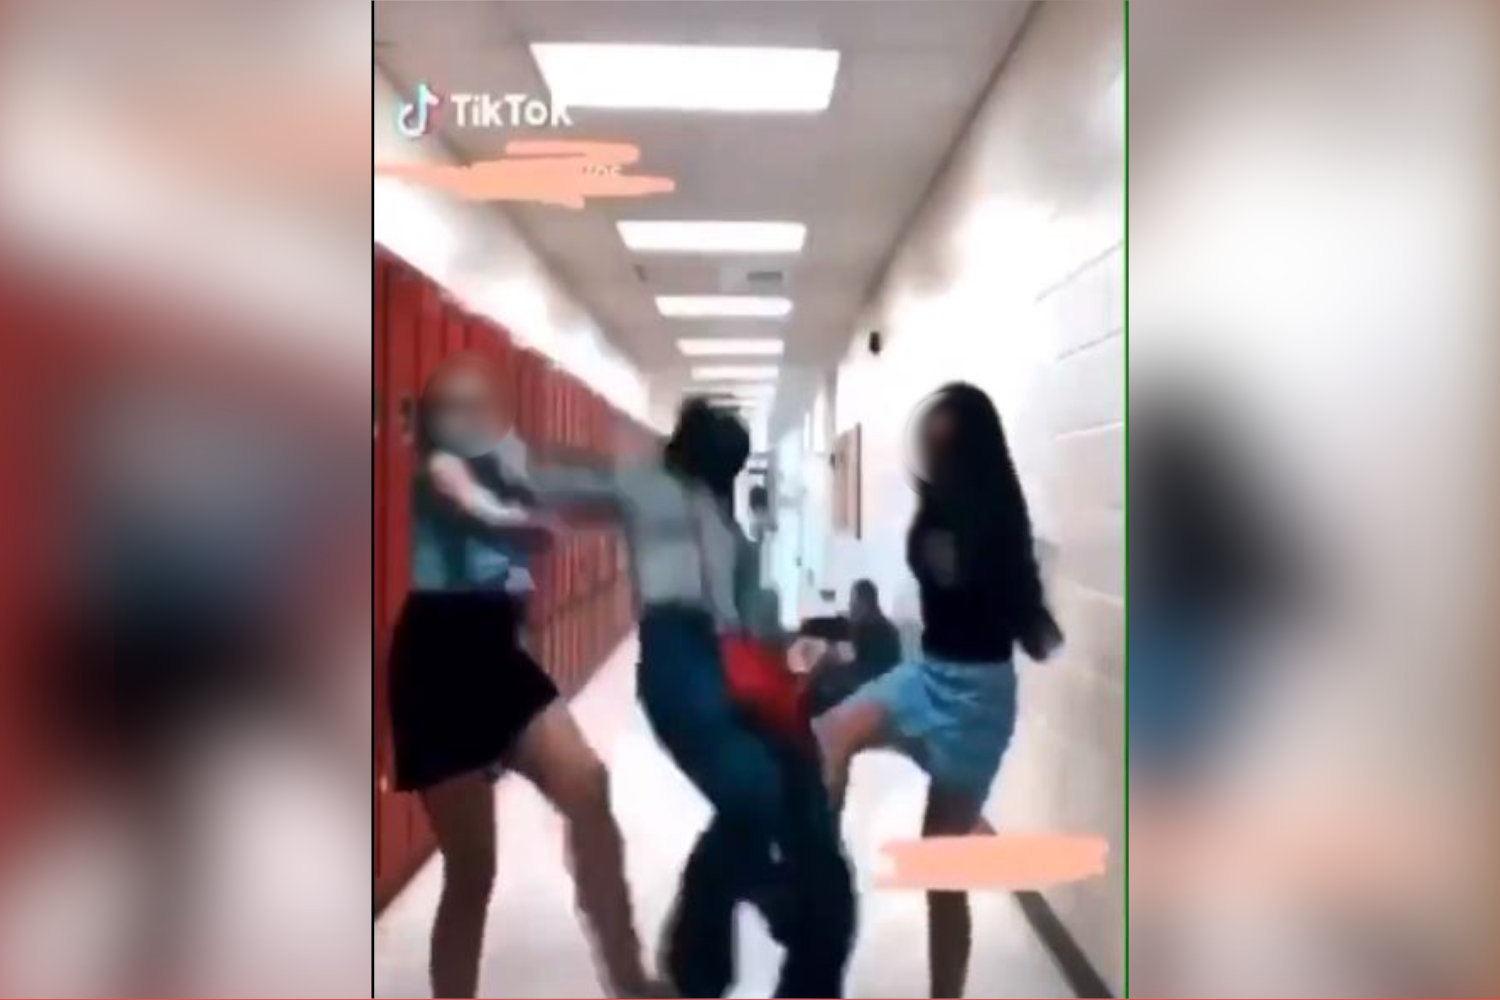 A screencap of the video showing two girls tripping another student on TikTok